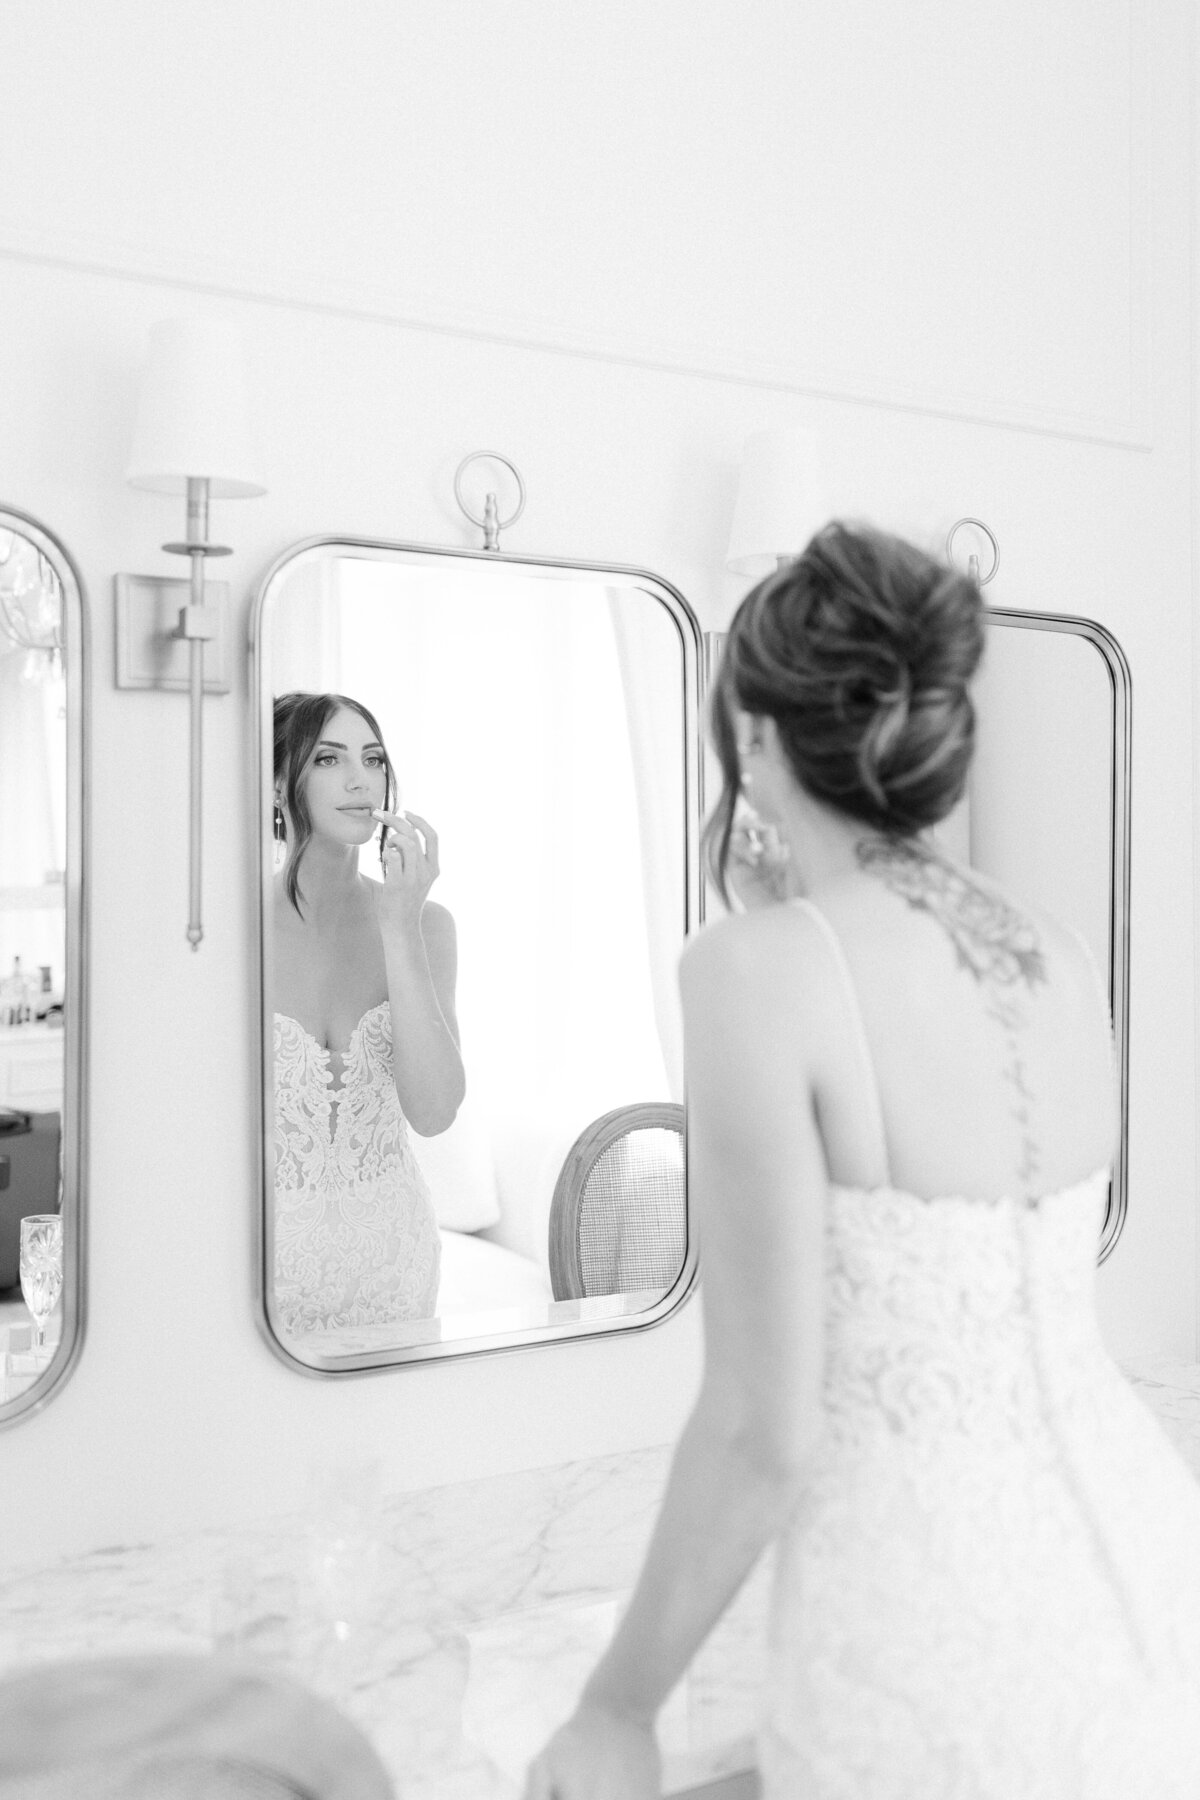 Bride getting ready in the mirror